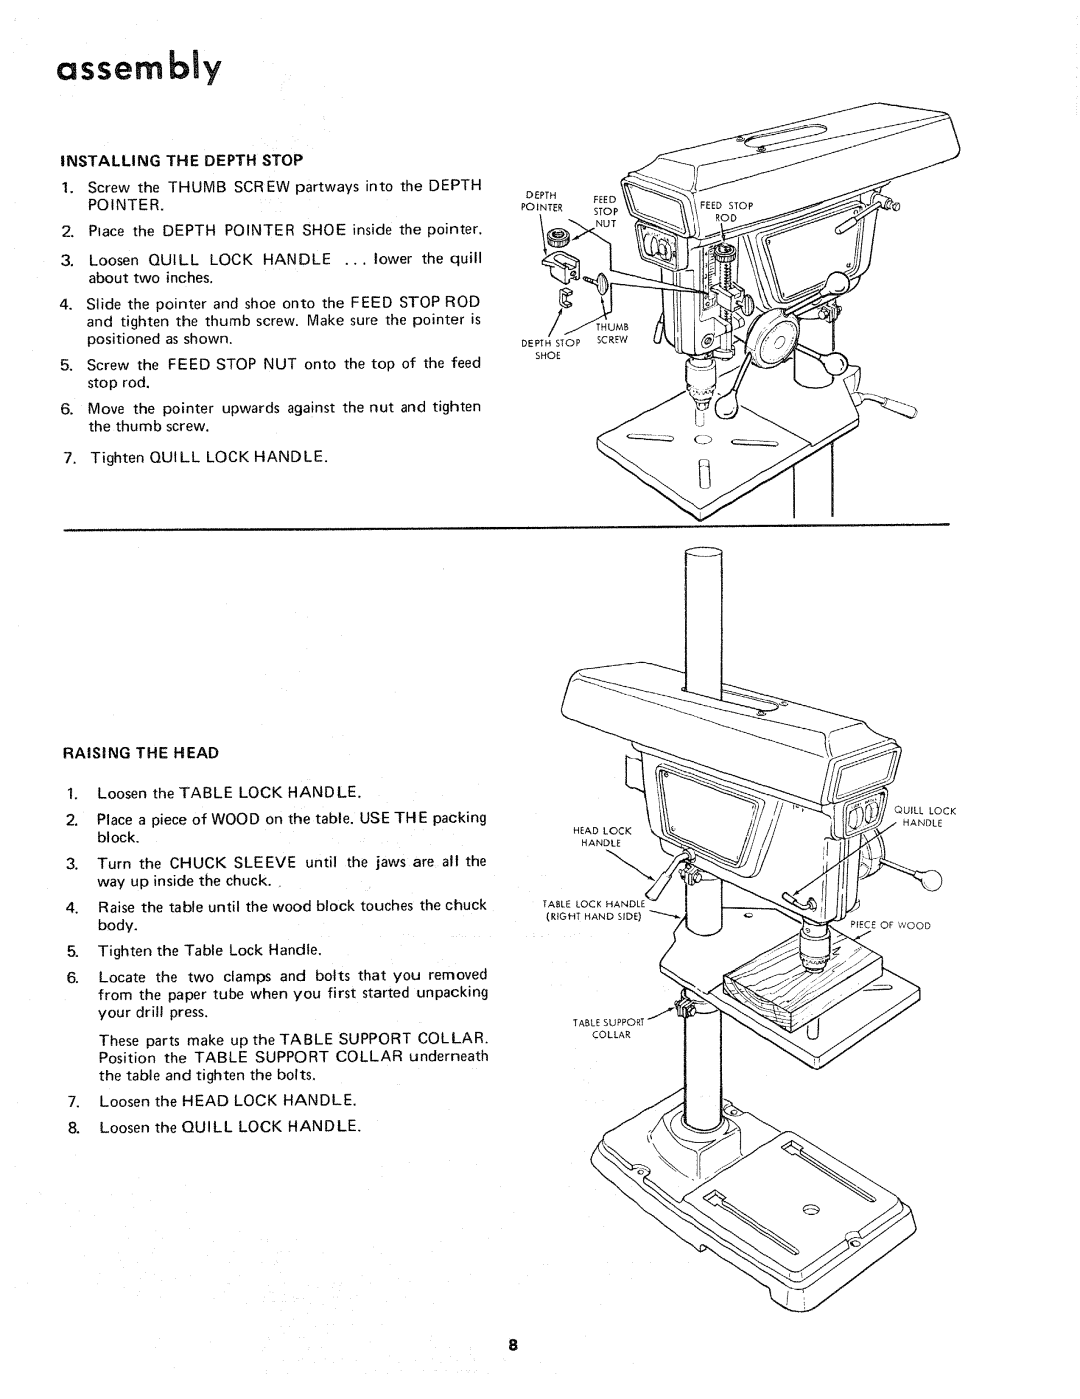 Sears 113.21371 manual assembly, Raising The Head, Installing The Depth Stop 